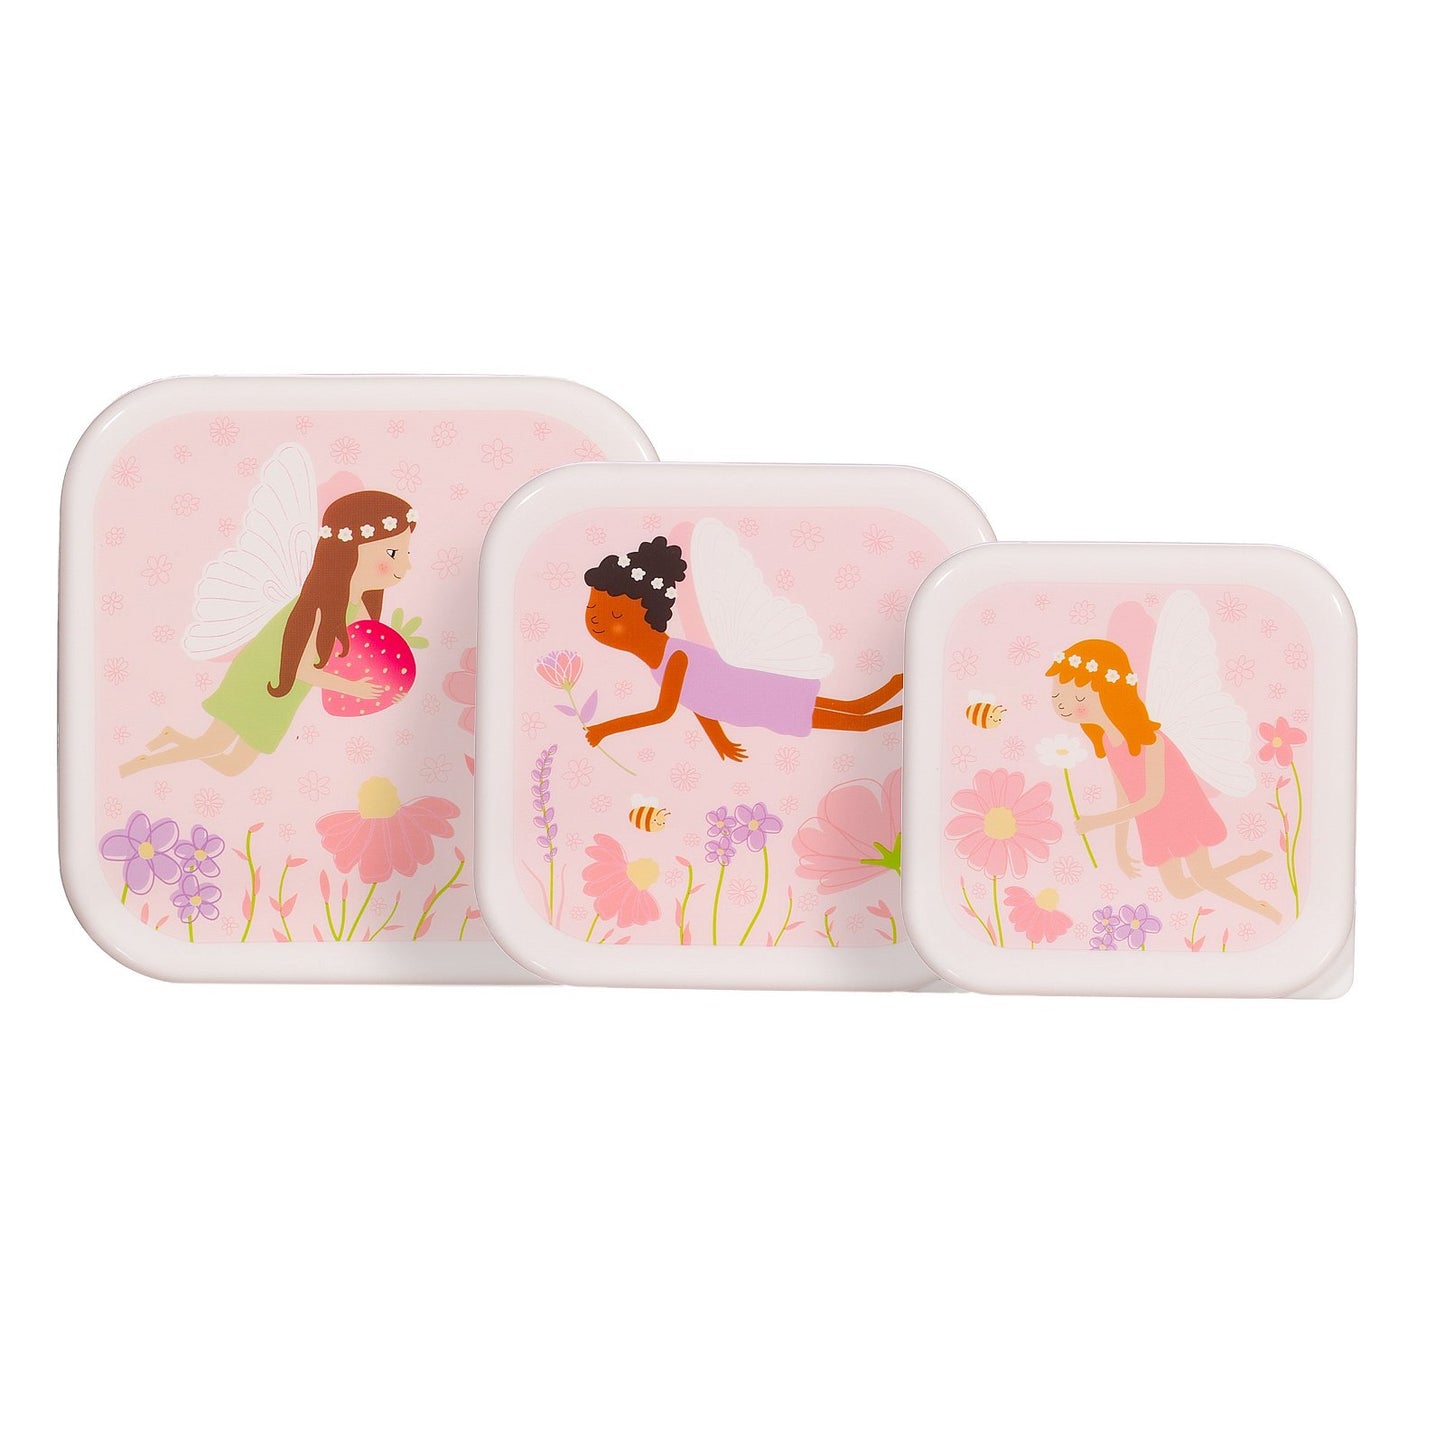 Fairy Lunch Boxes - Set of 3